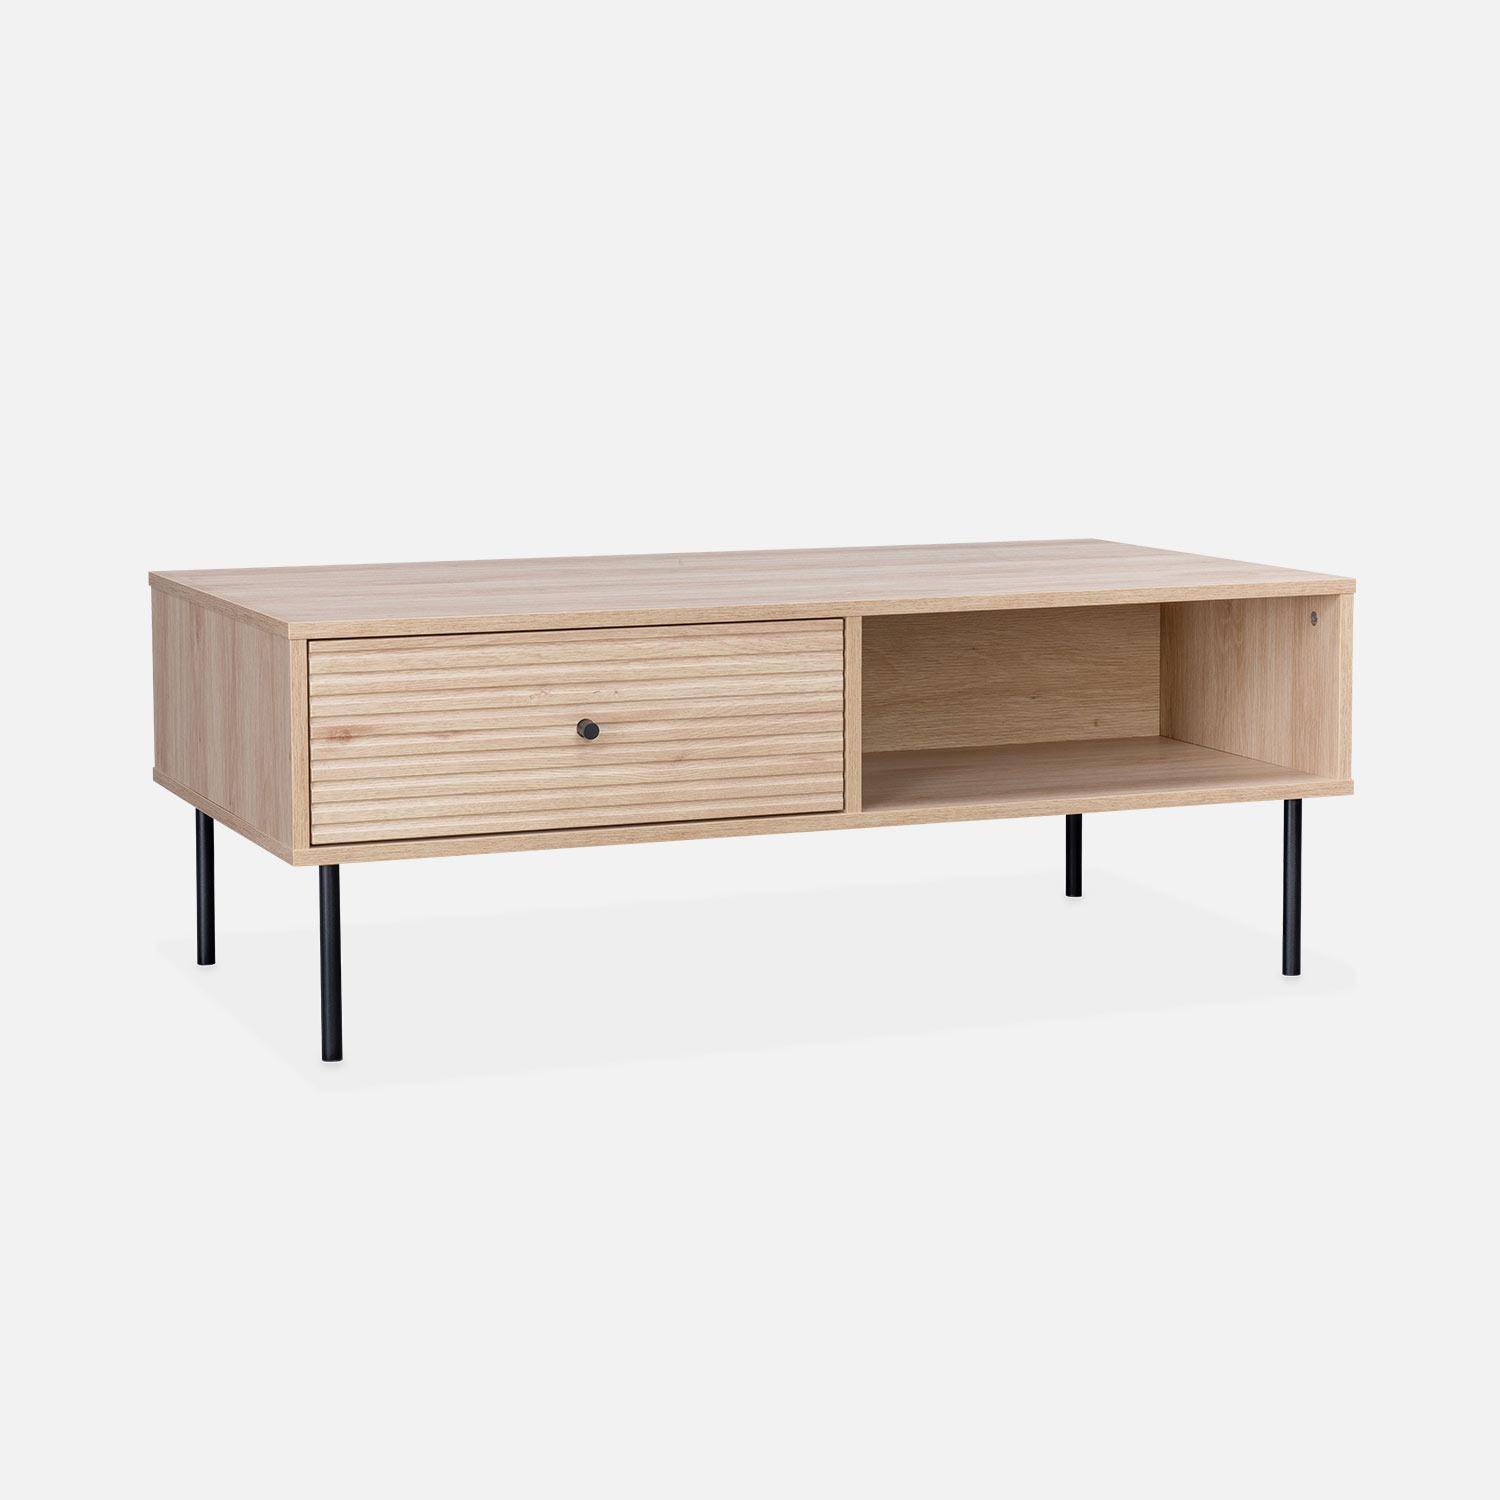 Grooved wood-effect coffee table with one drawer and storage nook, 110x59x41cm - Braga - Natural,sweeek,Photo3